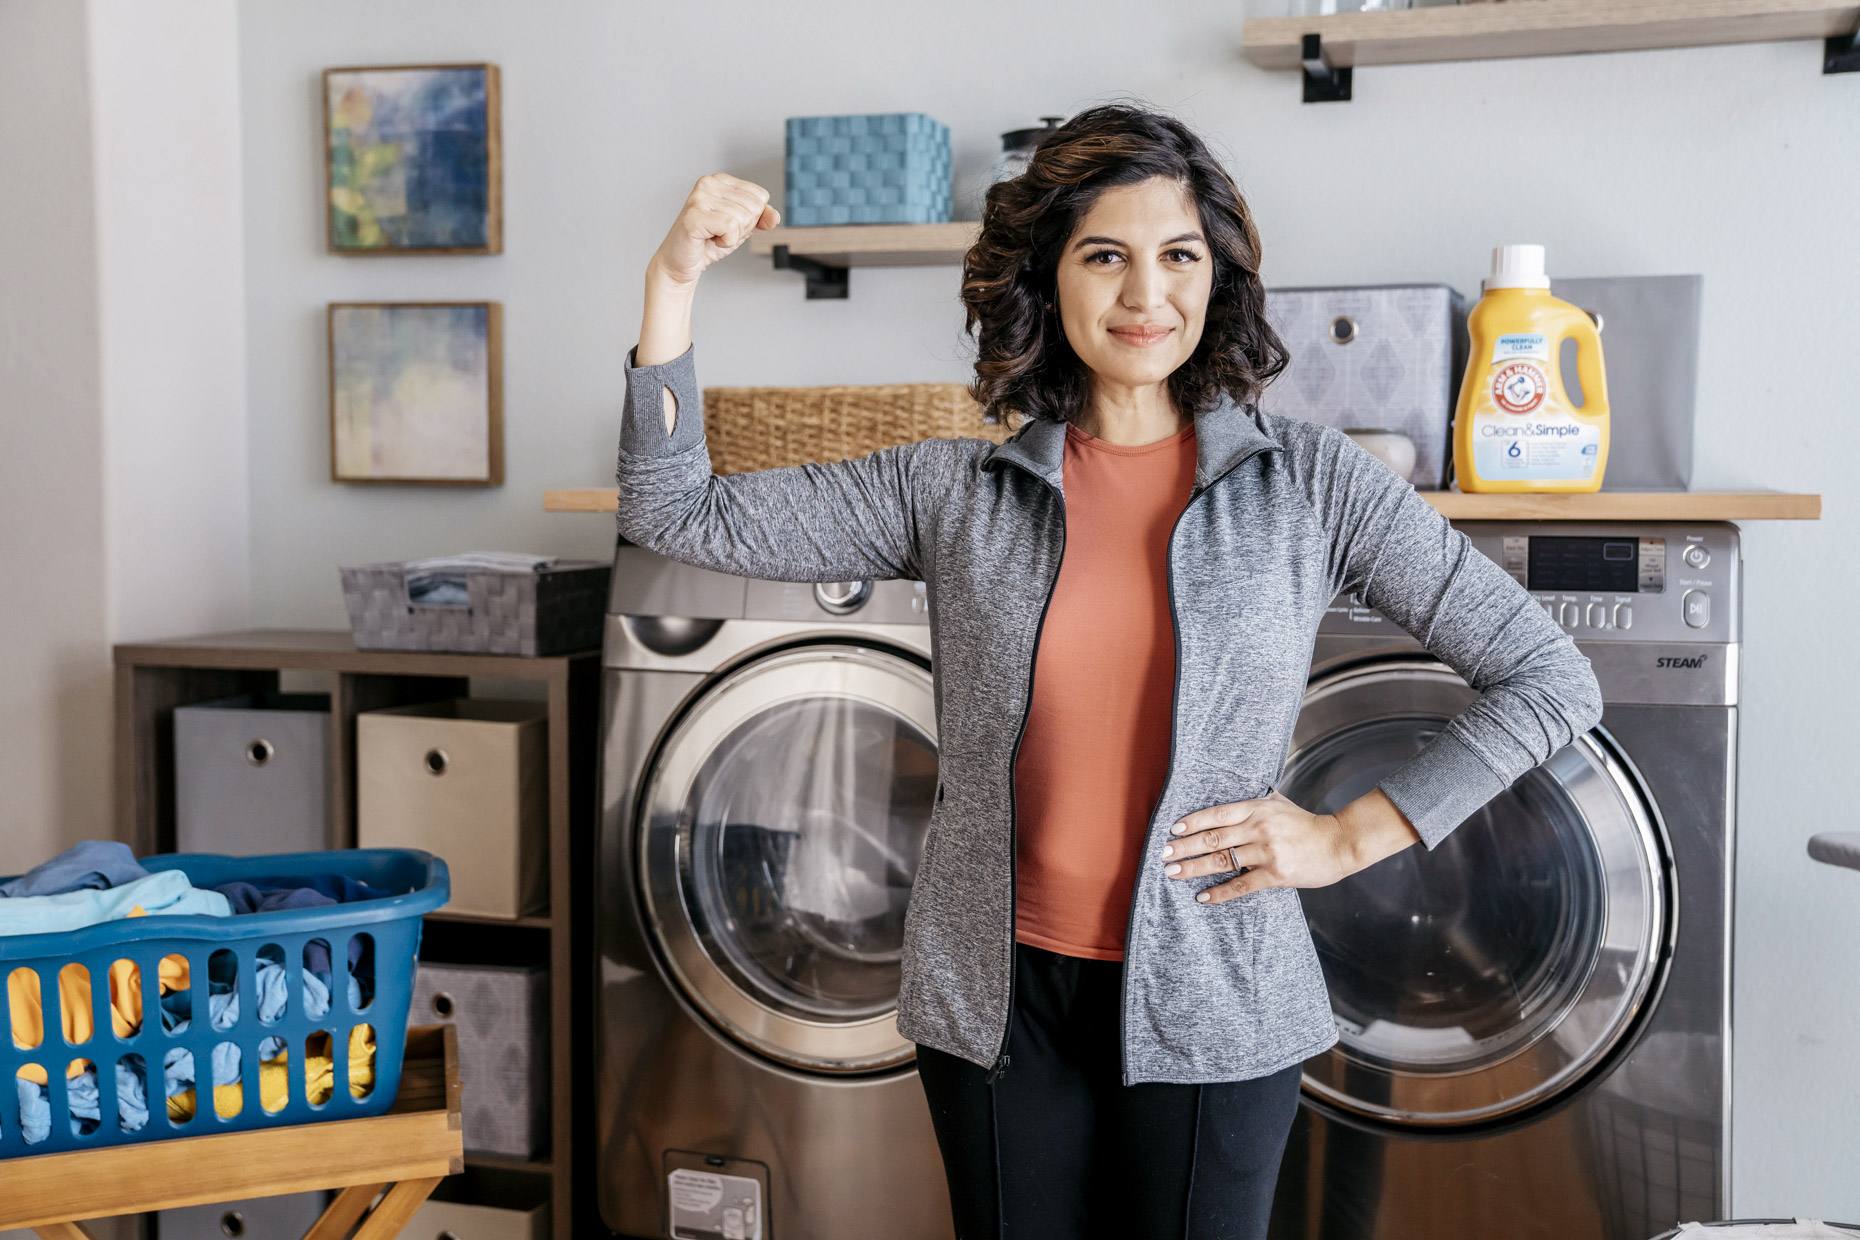 Confident woman with arm raised for Arm and Hammer Laundry detergent